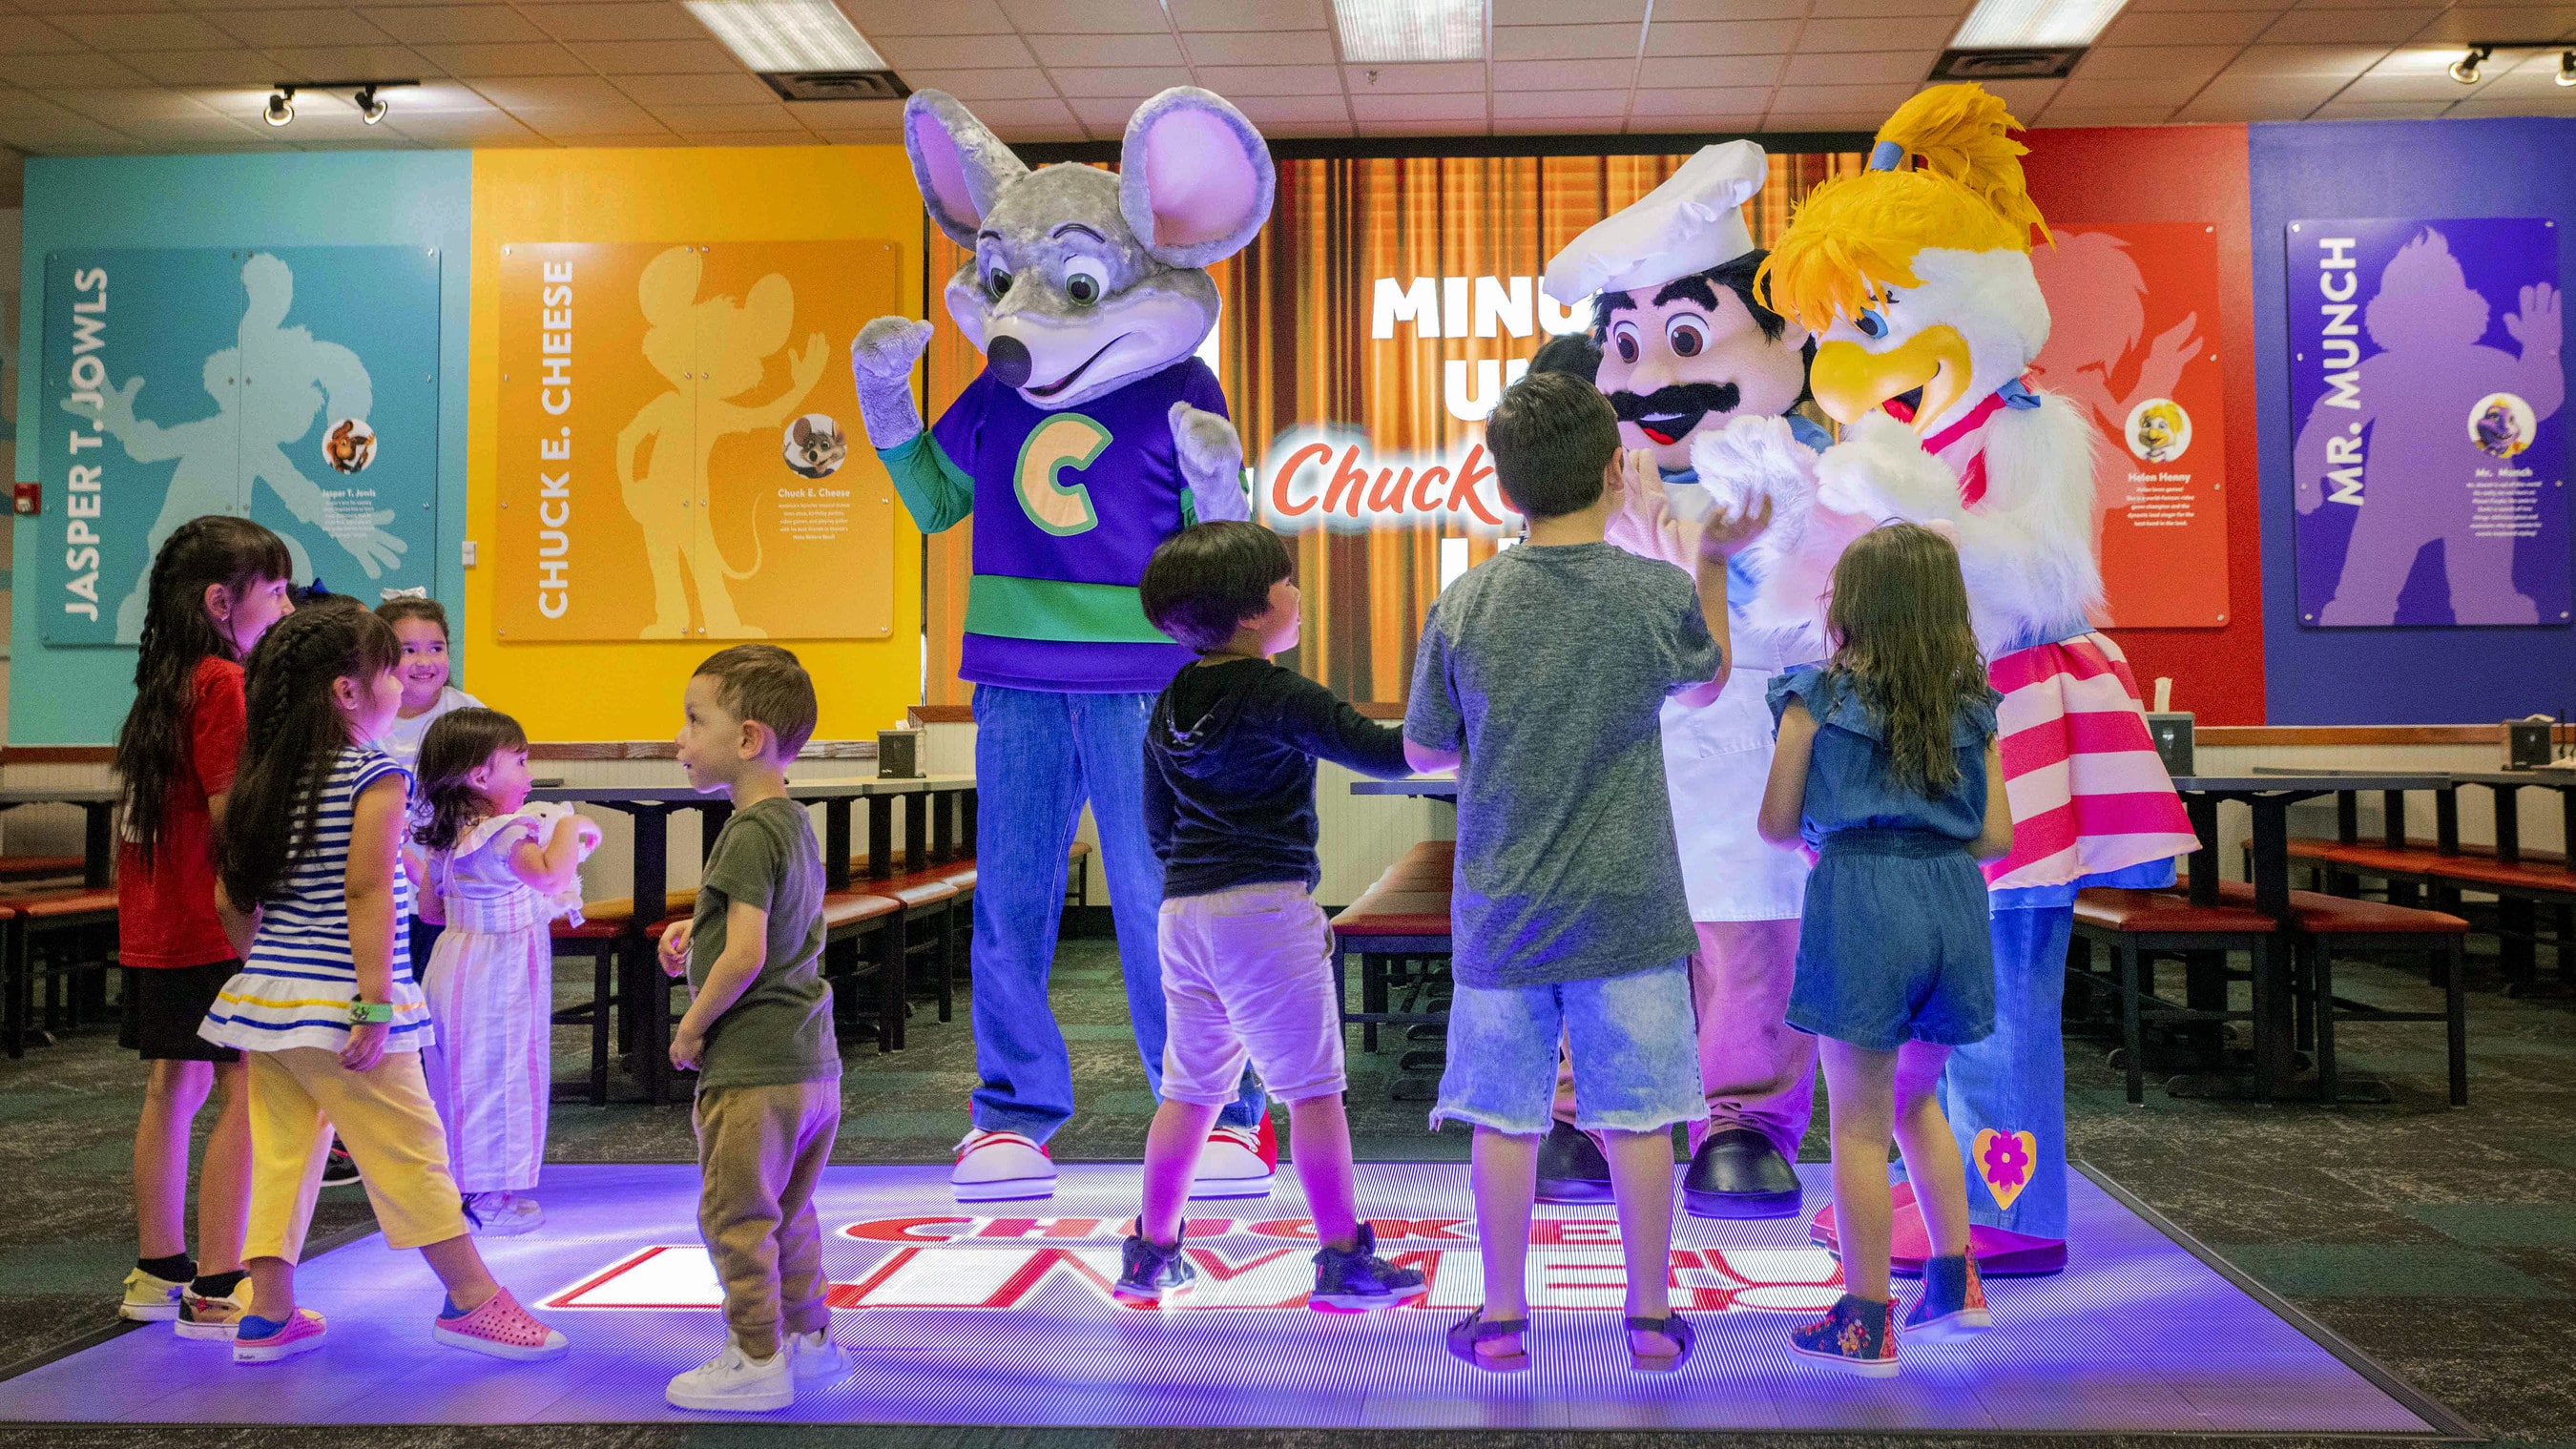 ALL NEW CHUCK E. CHEESE BRINGS MORE WOW TO SOUTH FLORIDA WITH MARKET